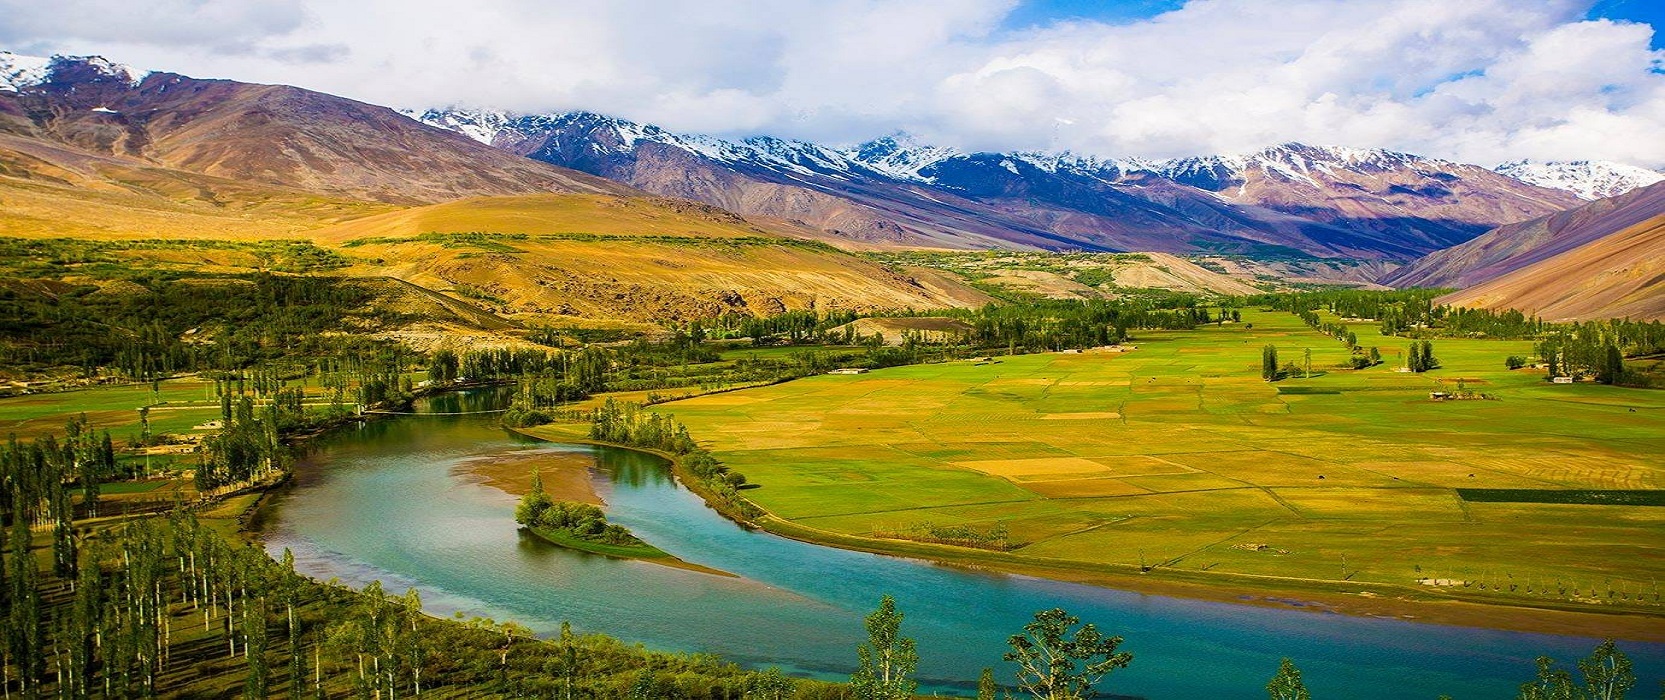 Phander Valley- The Land of Beauty